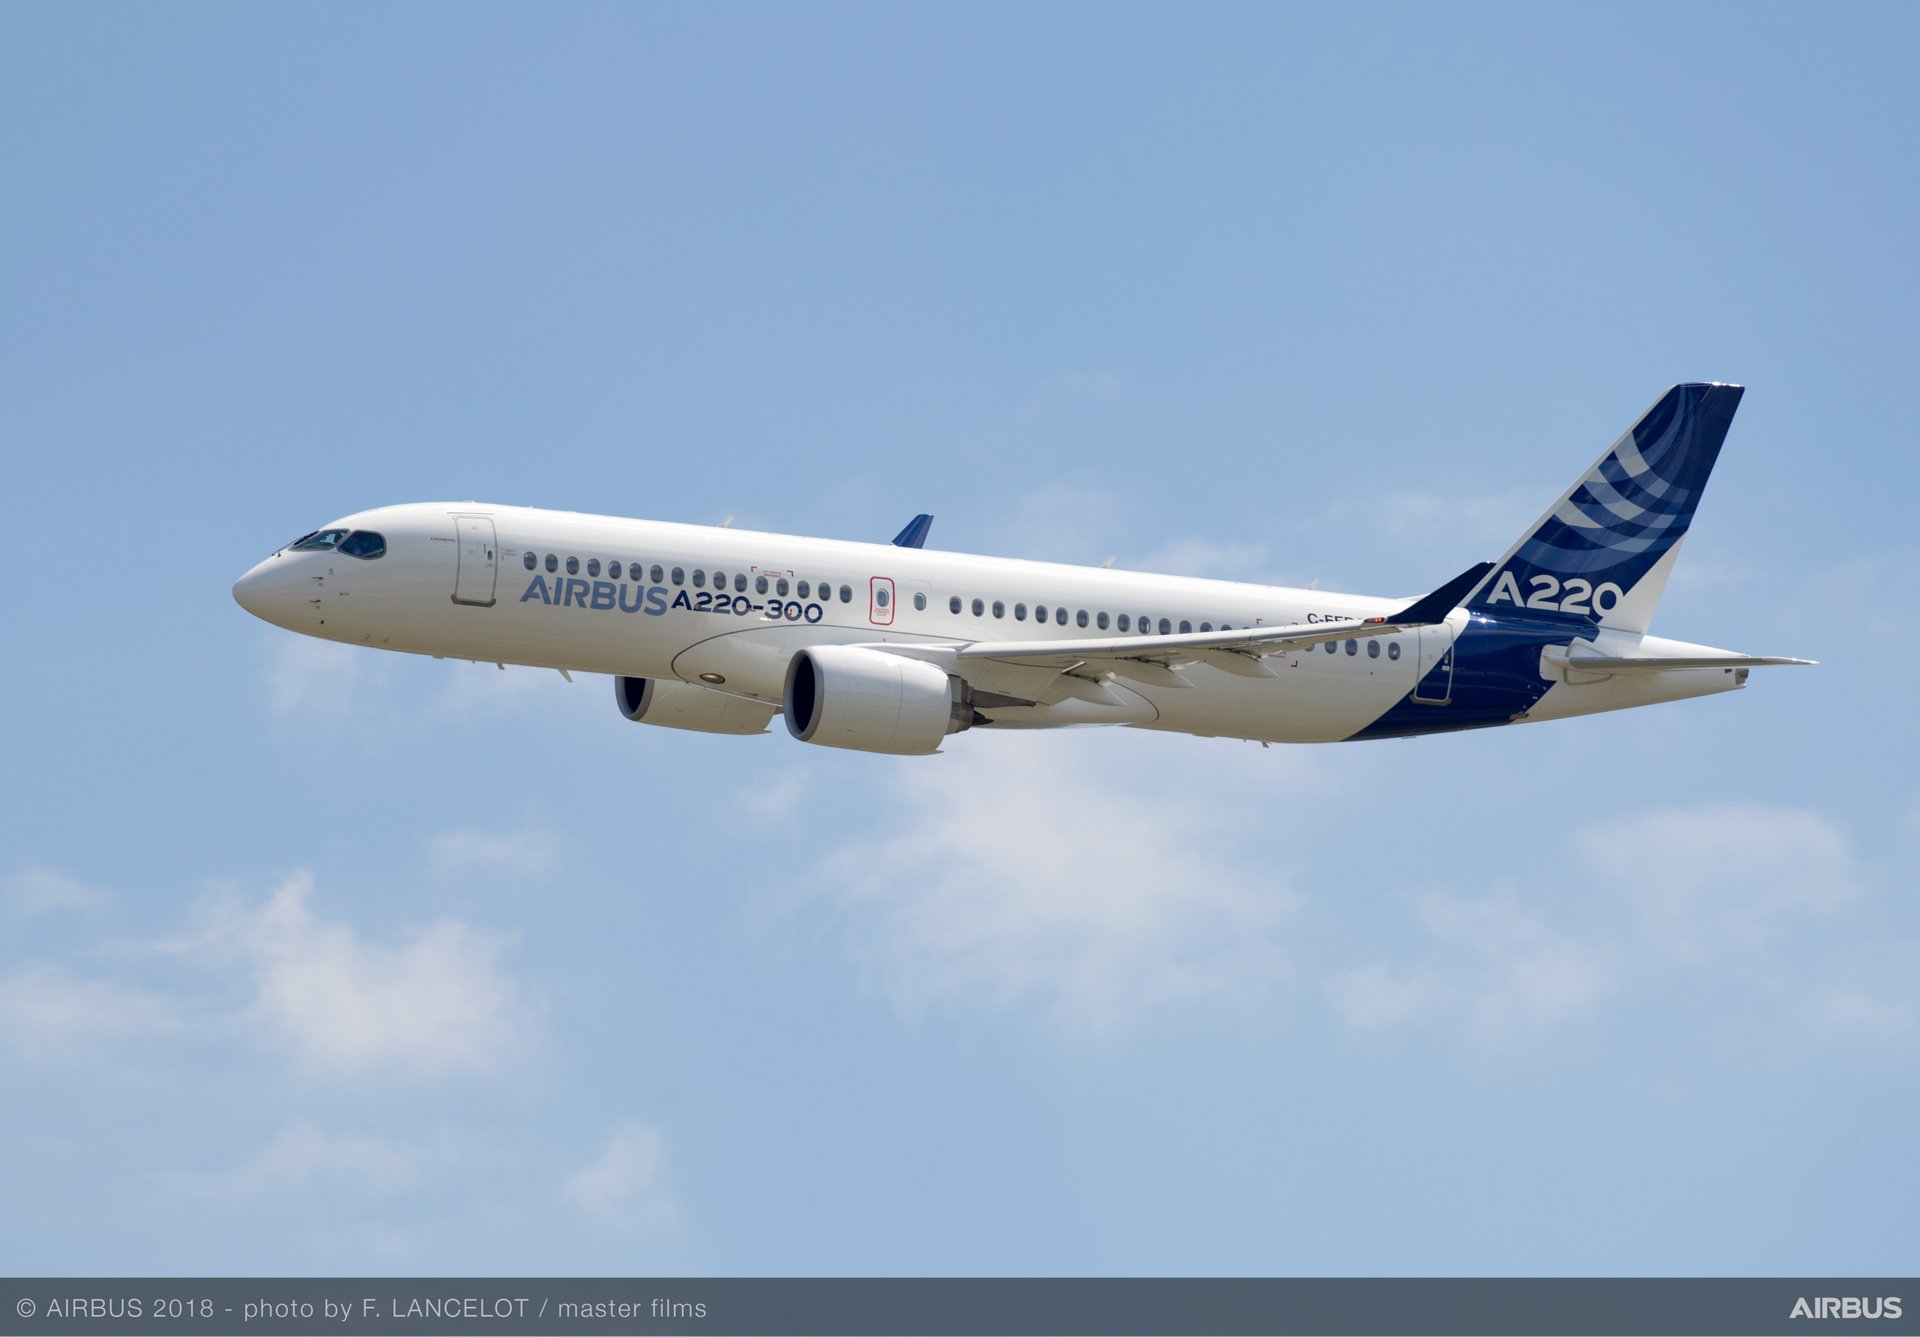 [Image: Airbus-A220-300-new-member-of-the-airbus...1&qlt=85,0]